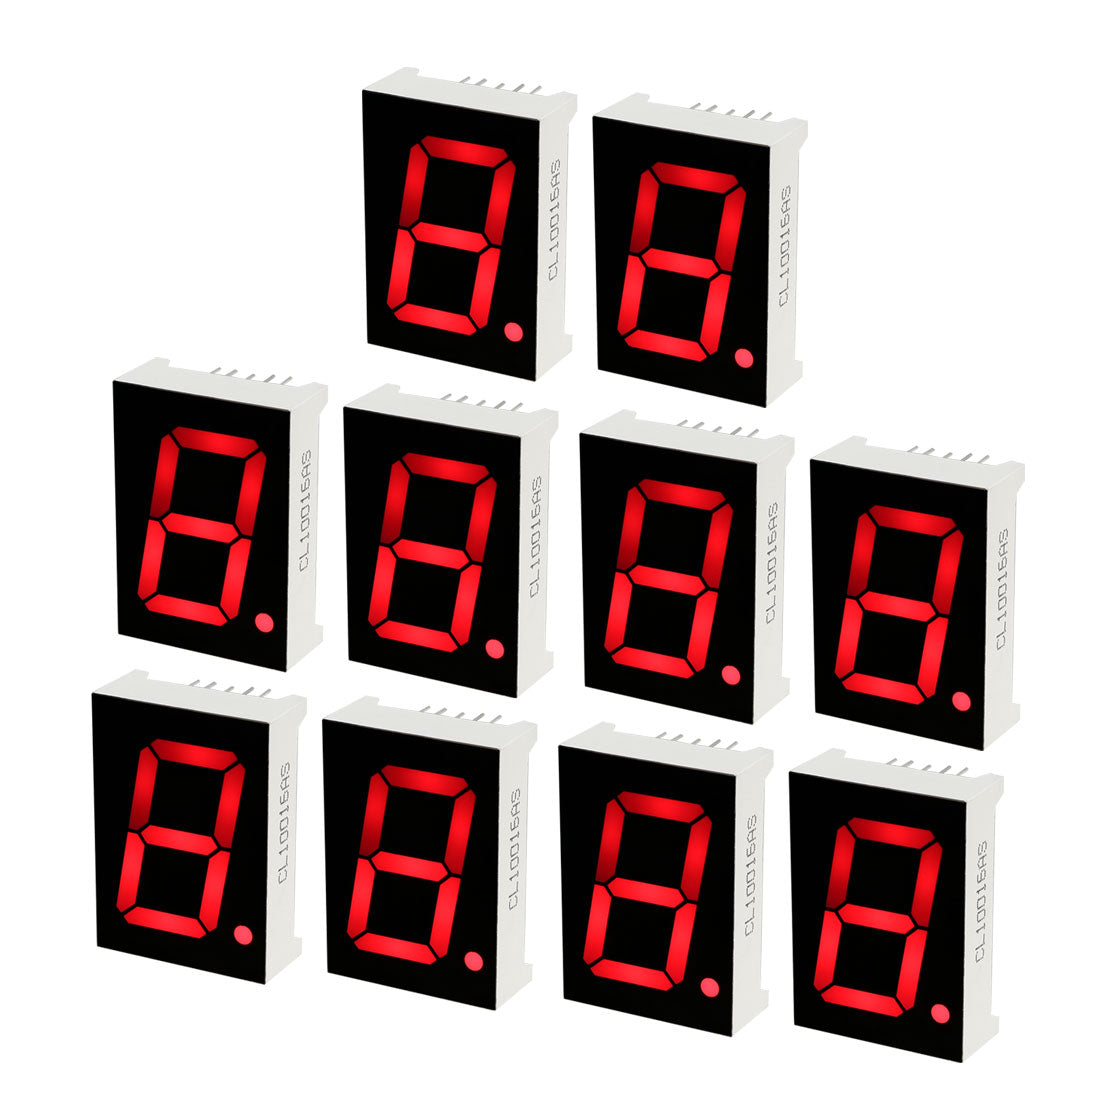 uxcell Uxcell Common Cathode 10 Pin 1 Bit 7 Segment 1.34 x 0.94 x 0.41 Inch 1" Red LED Display Digital Tube 10pcs